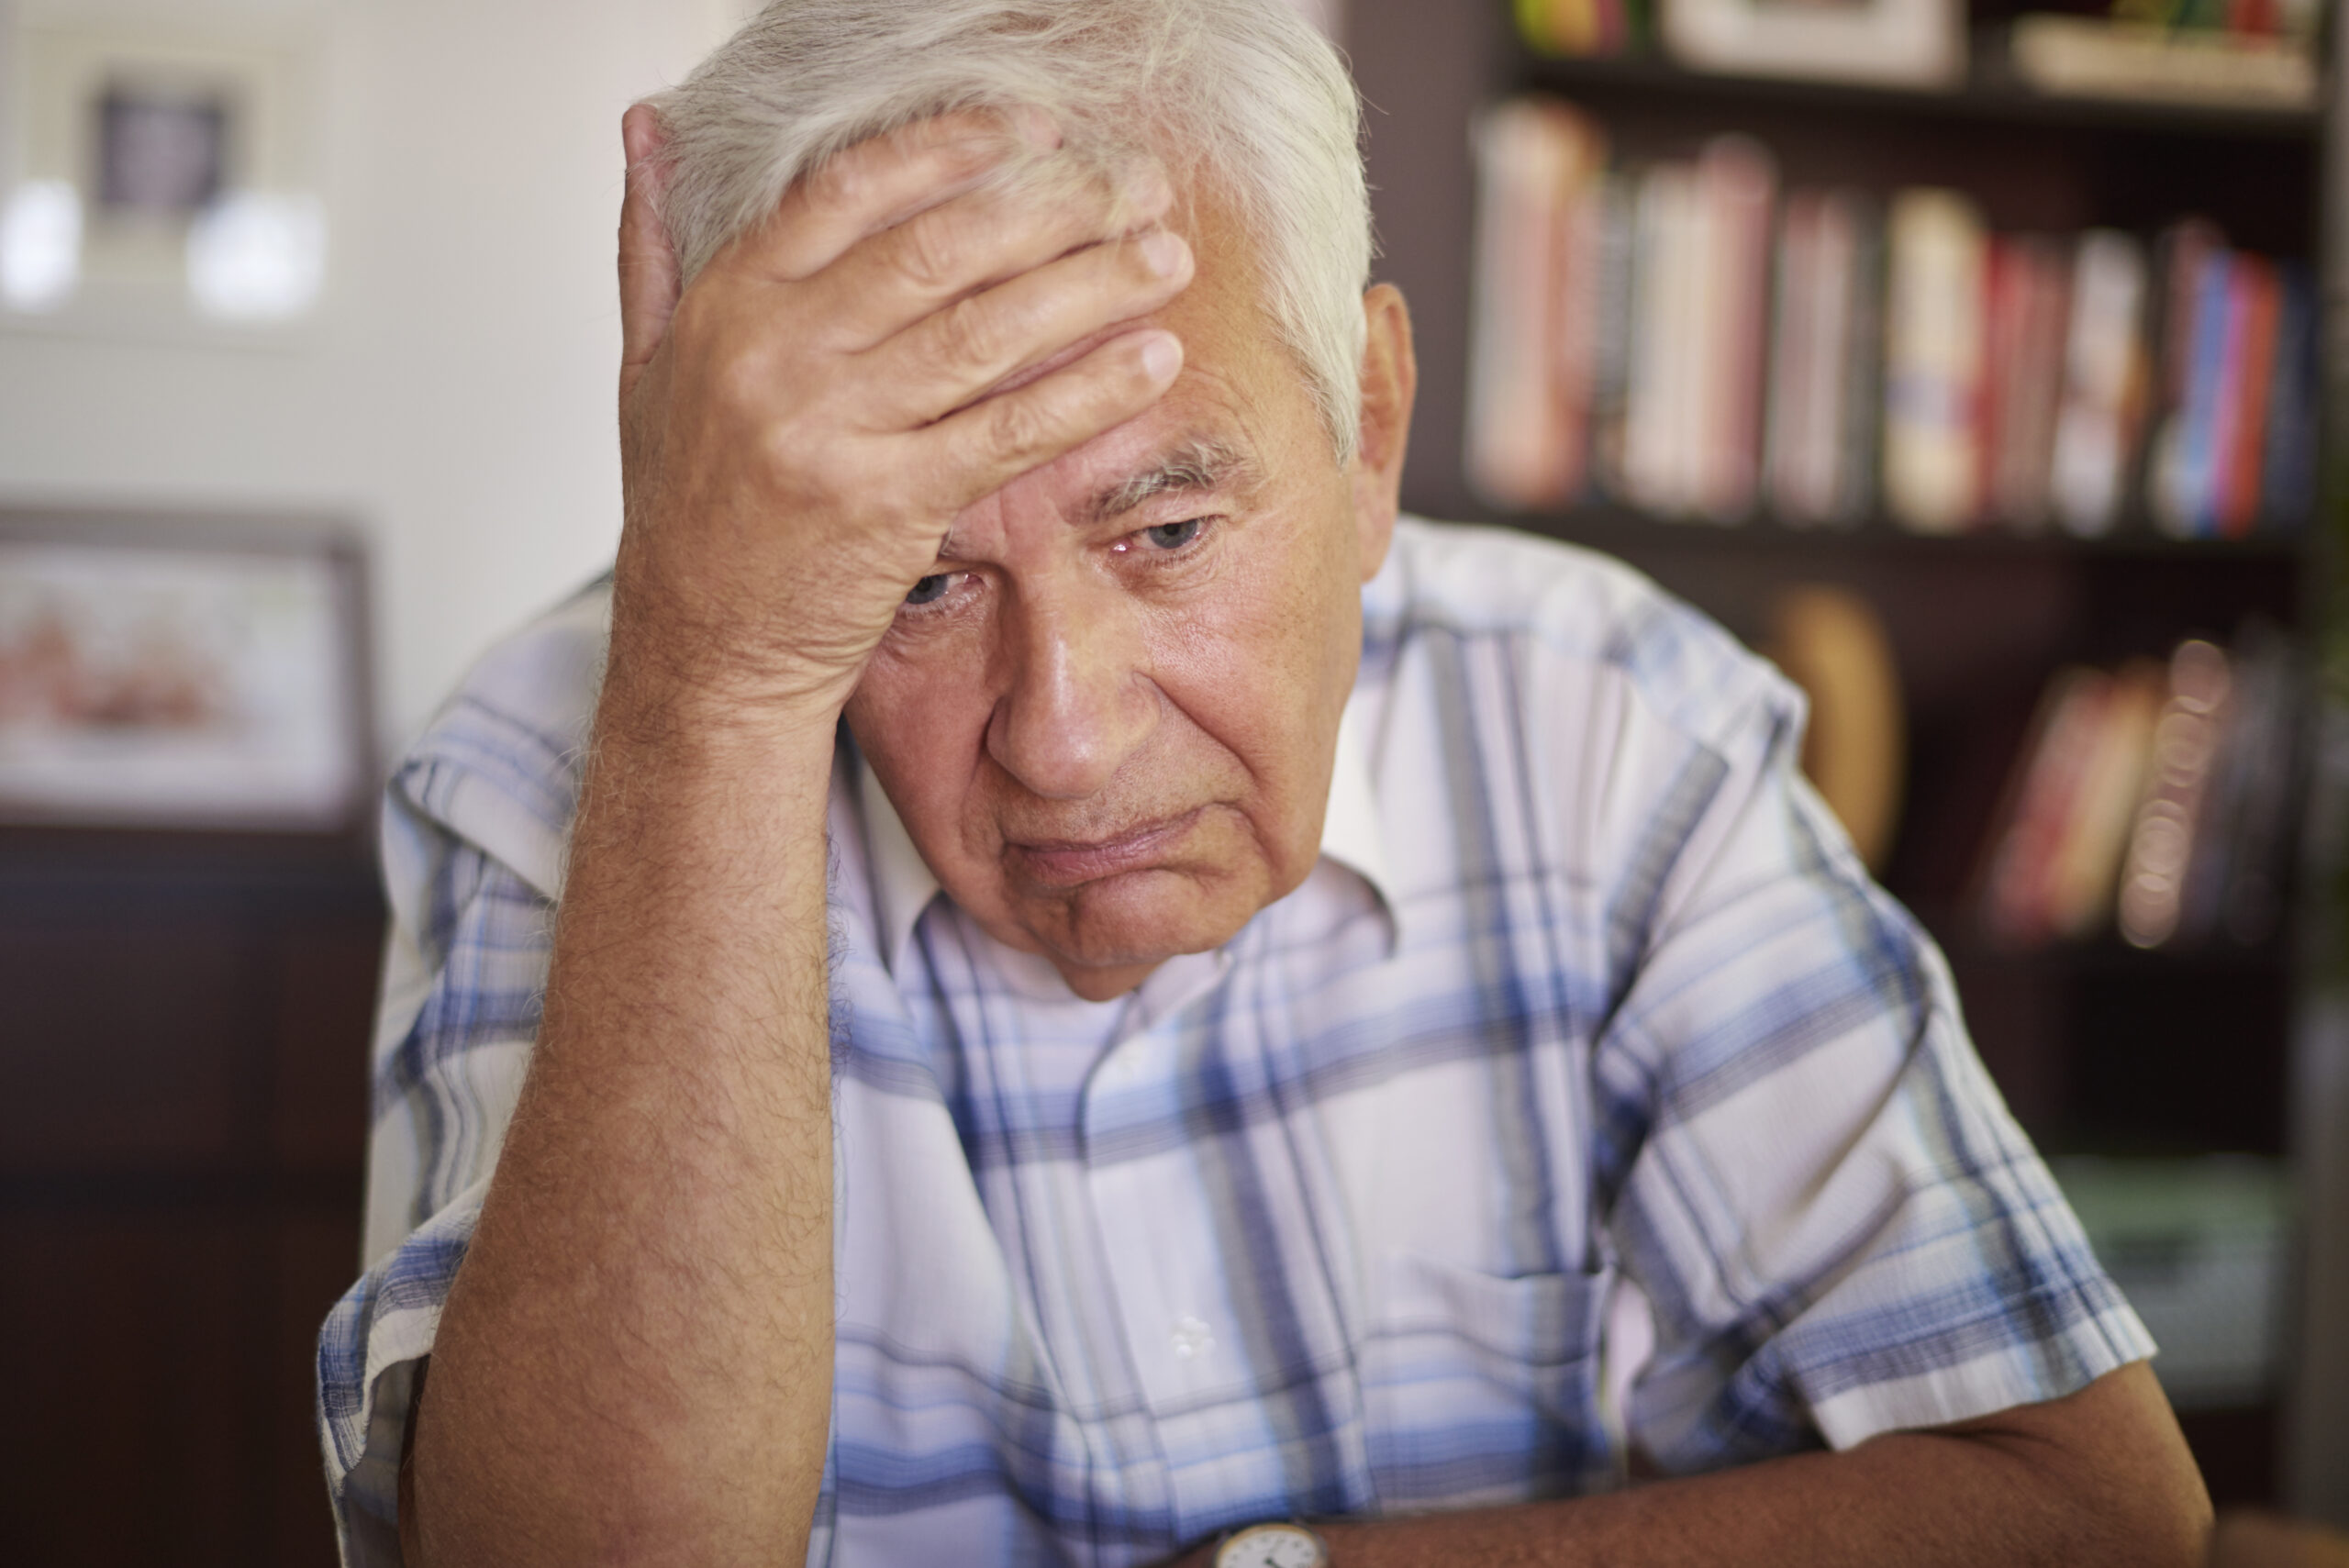 How Can I Manage Retirement Depression?